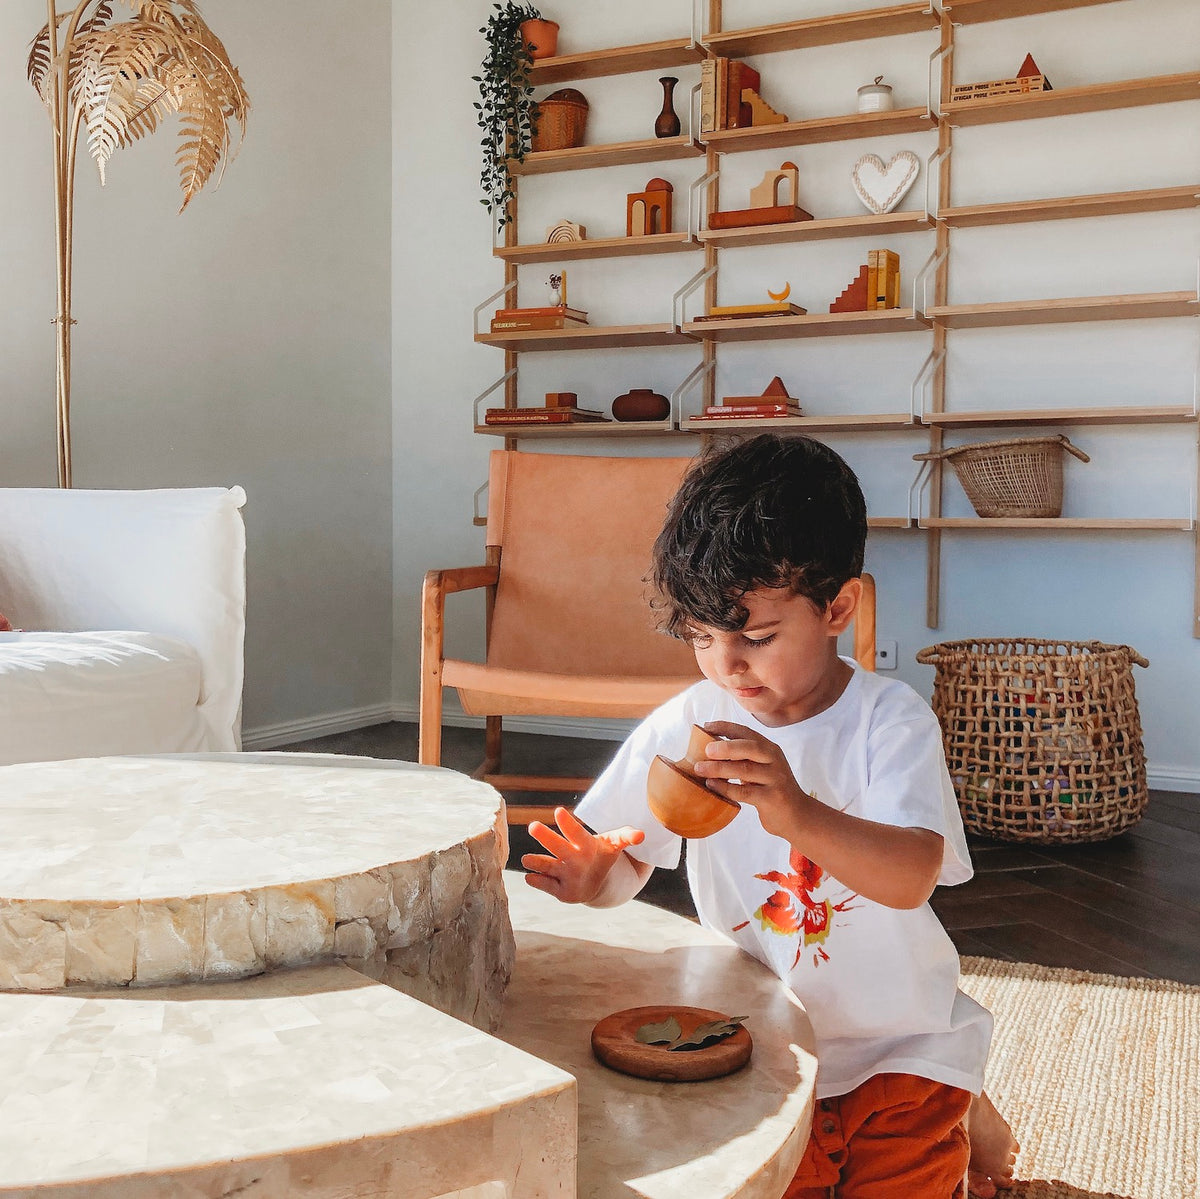 an image of a child wearing a white print shirt and red shorts kneeling at a natural table playing with a wooden mortar and pestle herb crusher they are holding the mushroom shaped handle and they are crushing a leaf